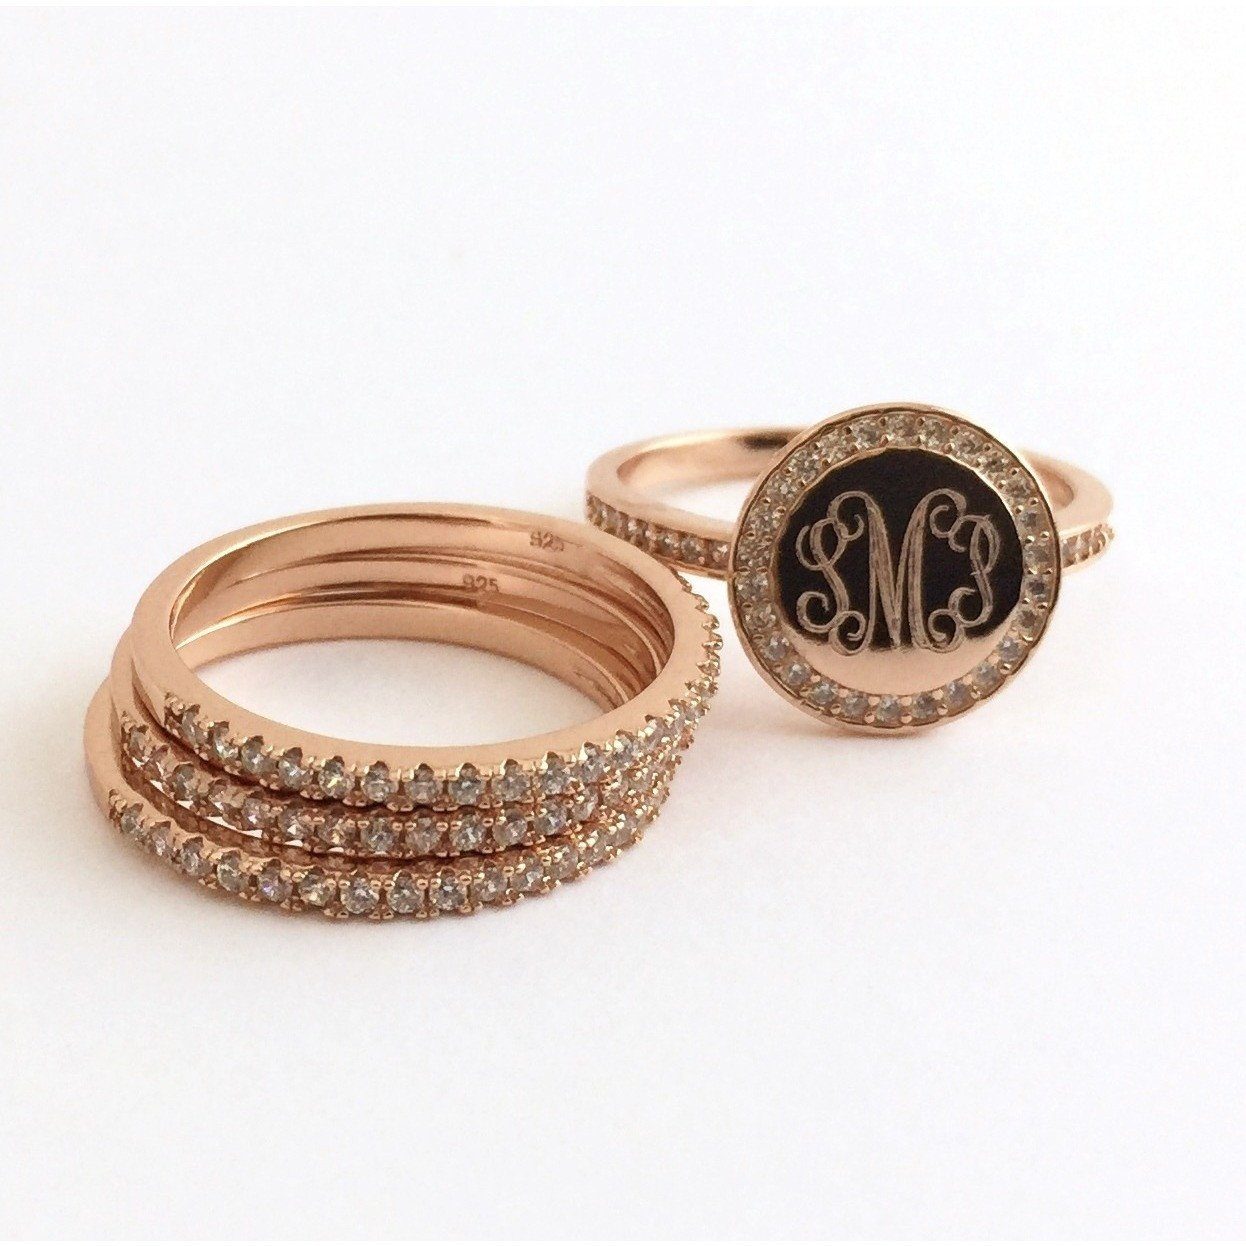 Monogram Stacking Rings with Cubic Zirconia in Sterling Silver - The  Personal Exchange